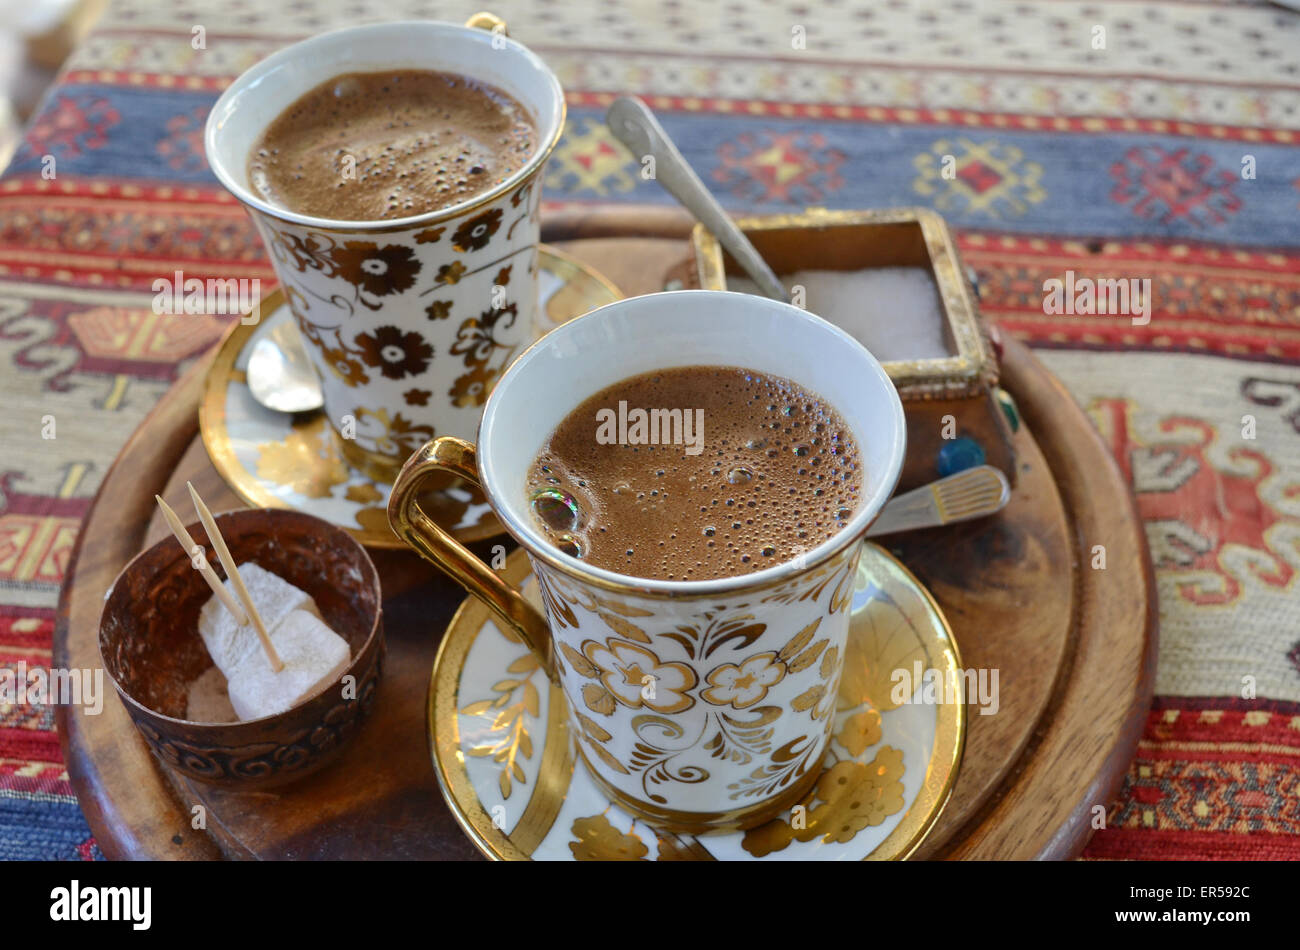 Two cups of Turkish coffee on wooden tray placed upon a colorful rug Stock Photo